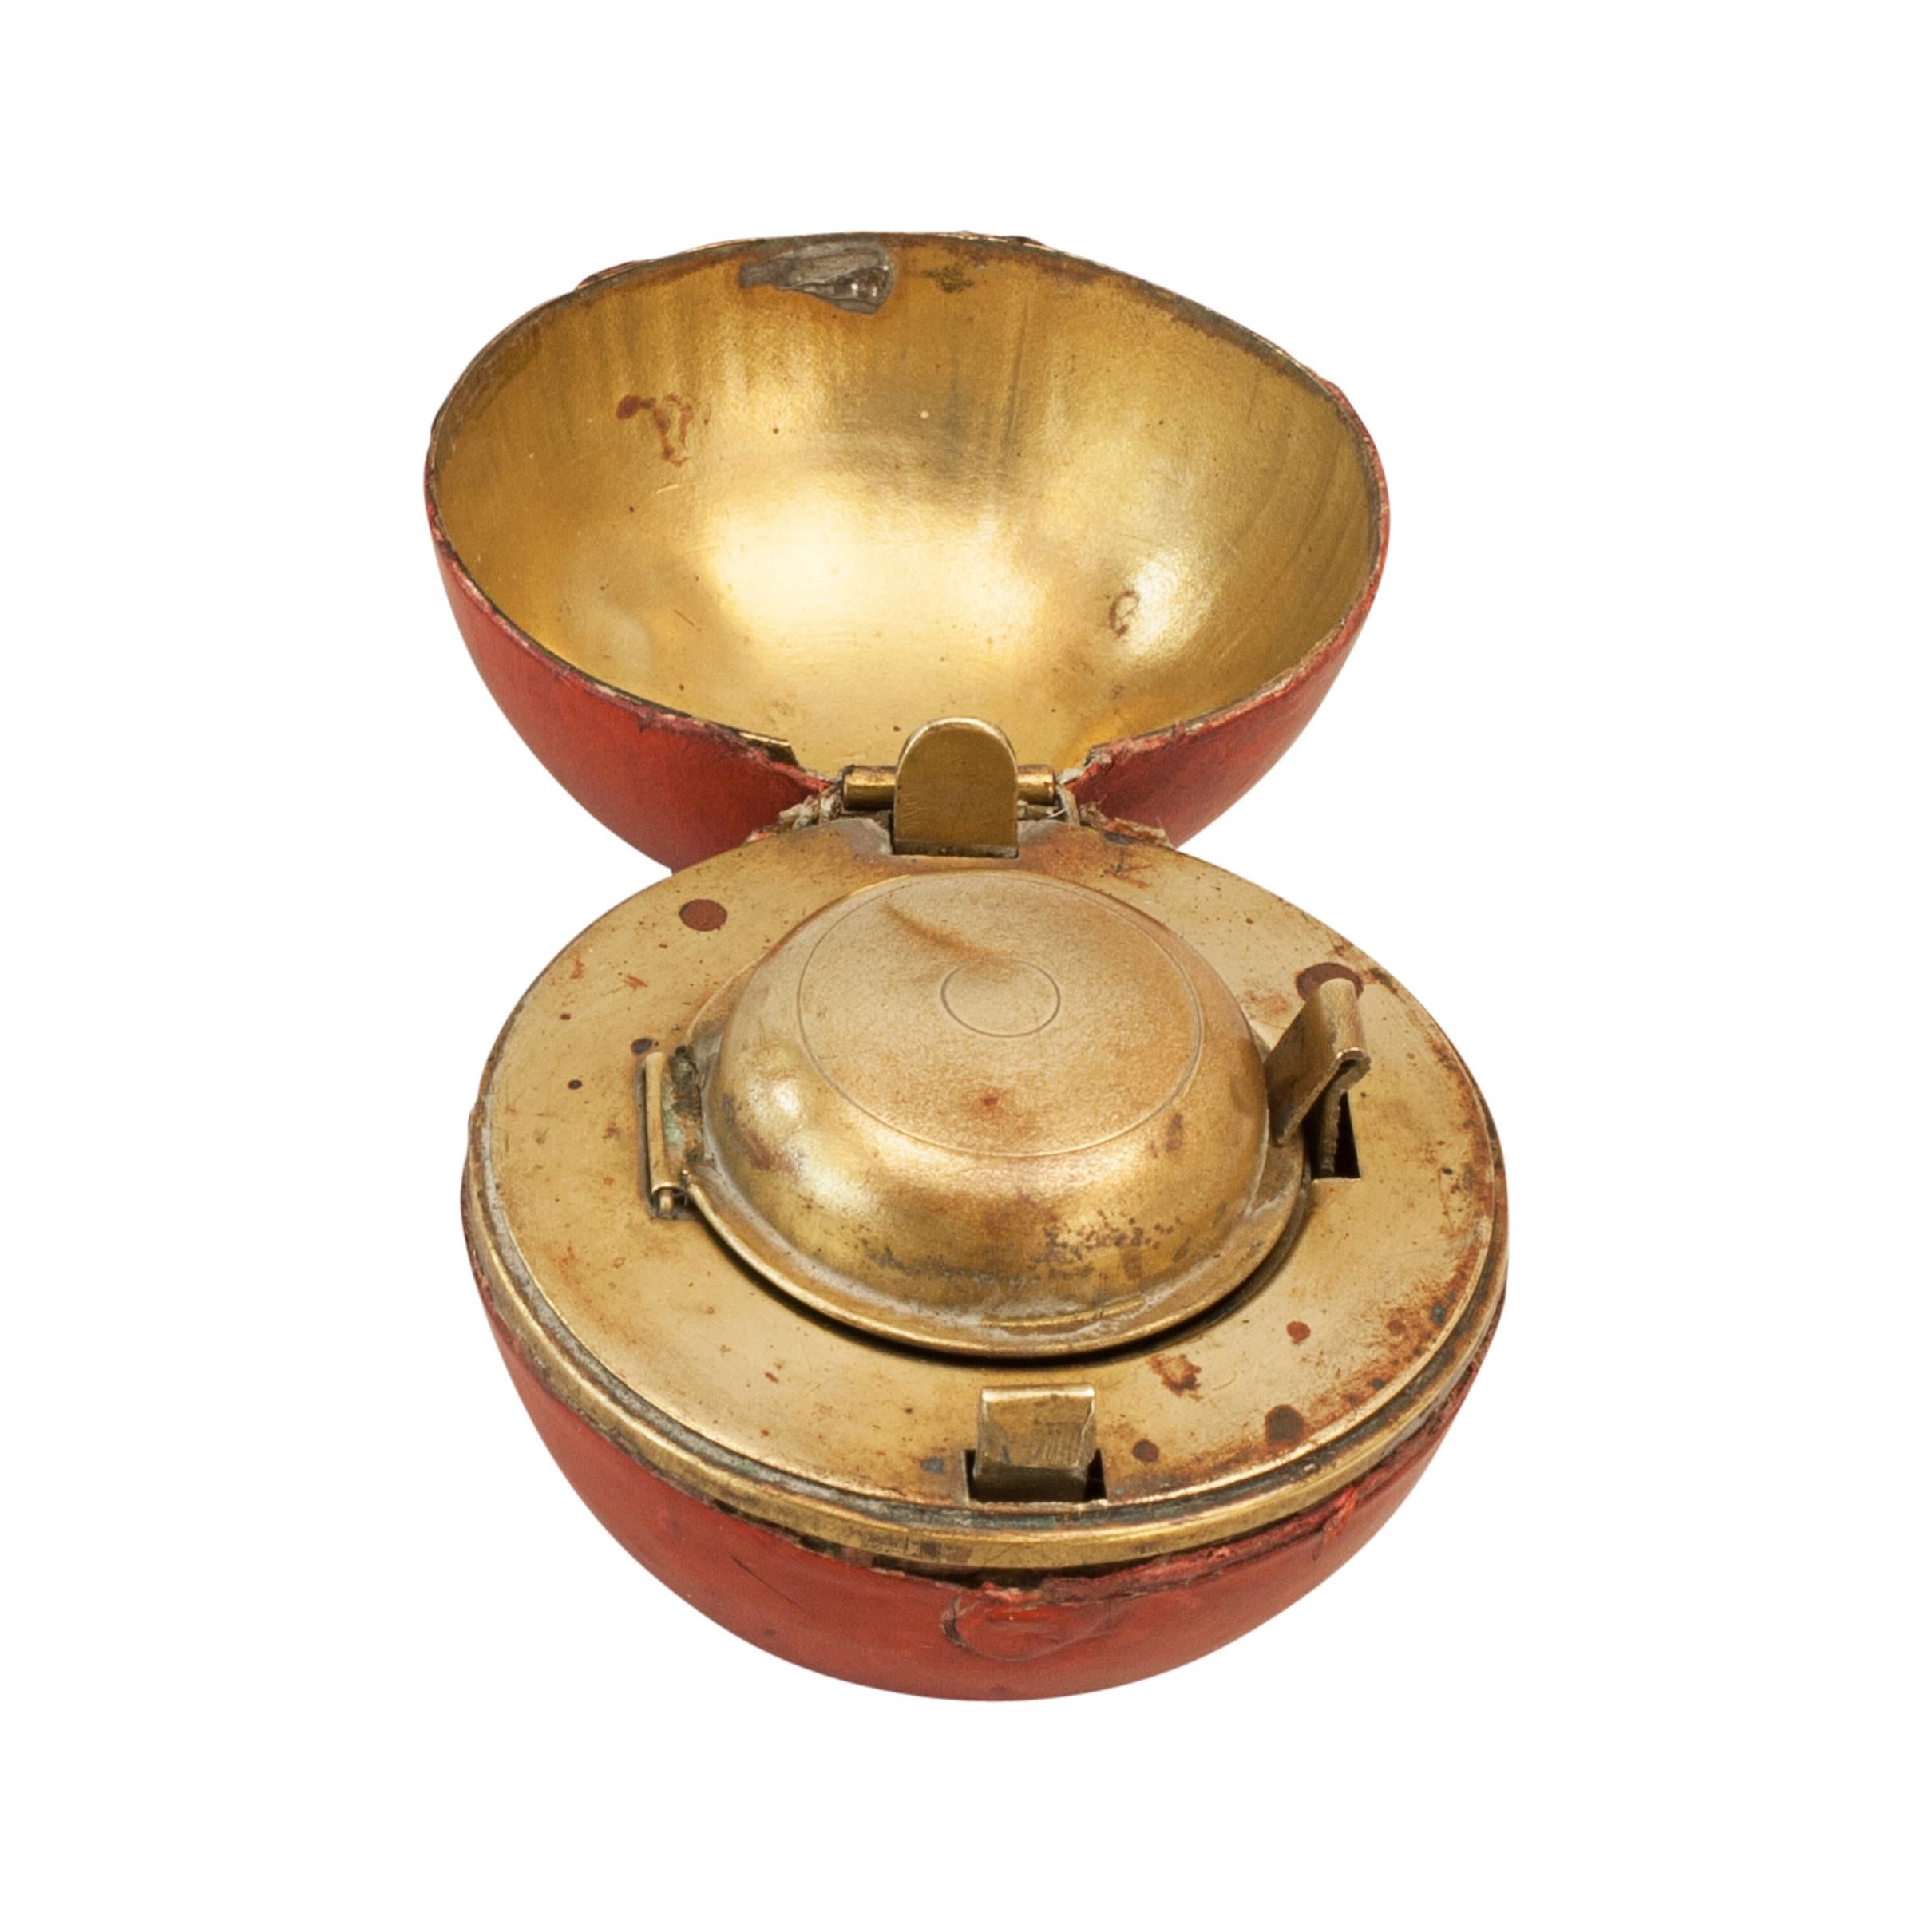 Rare Novelty Cricket Inkwell.
A wonderful leather covered traveling inkwell in the shape of a cricket ball. This is a very desirable, rare and unusual object made from brass and covered in imprinted leather to imitate a ball. It is hinged in the